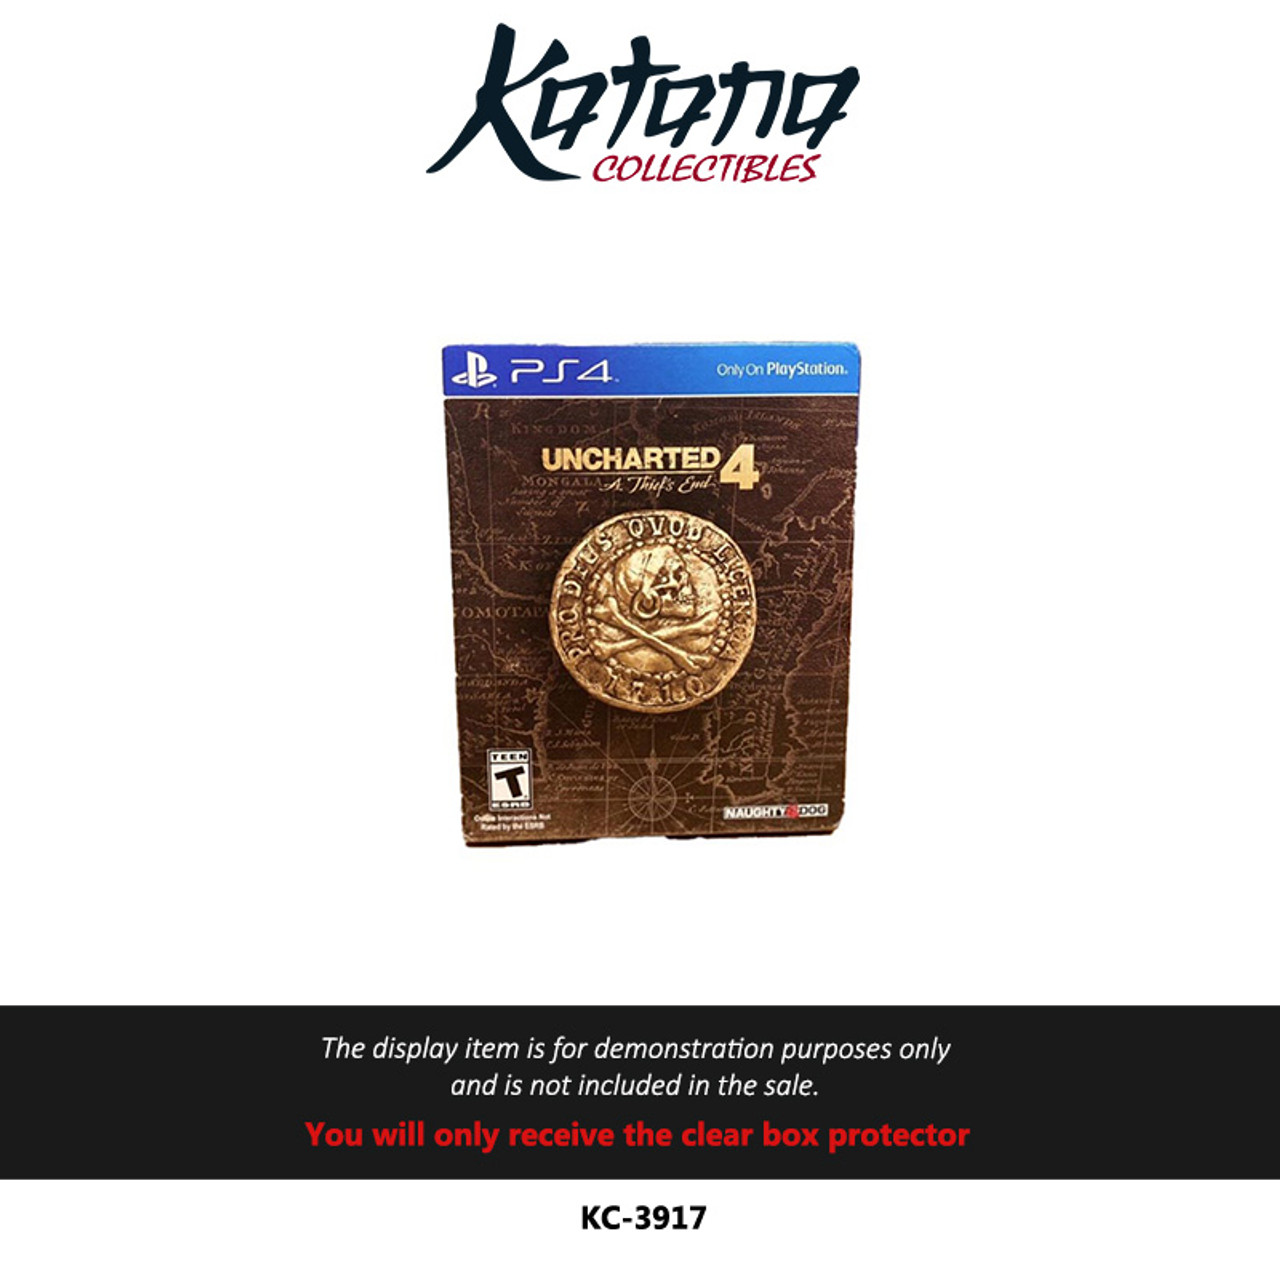 Katana Collectibles Protector For PS4 Uncharted 4: A Thief's End - Special Edition (US)